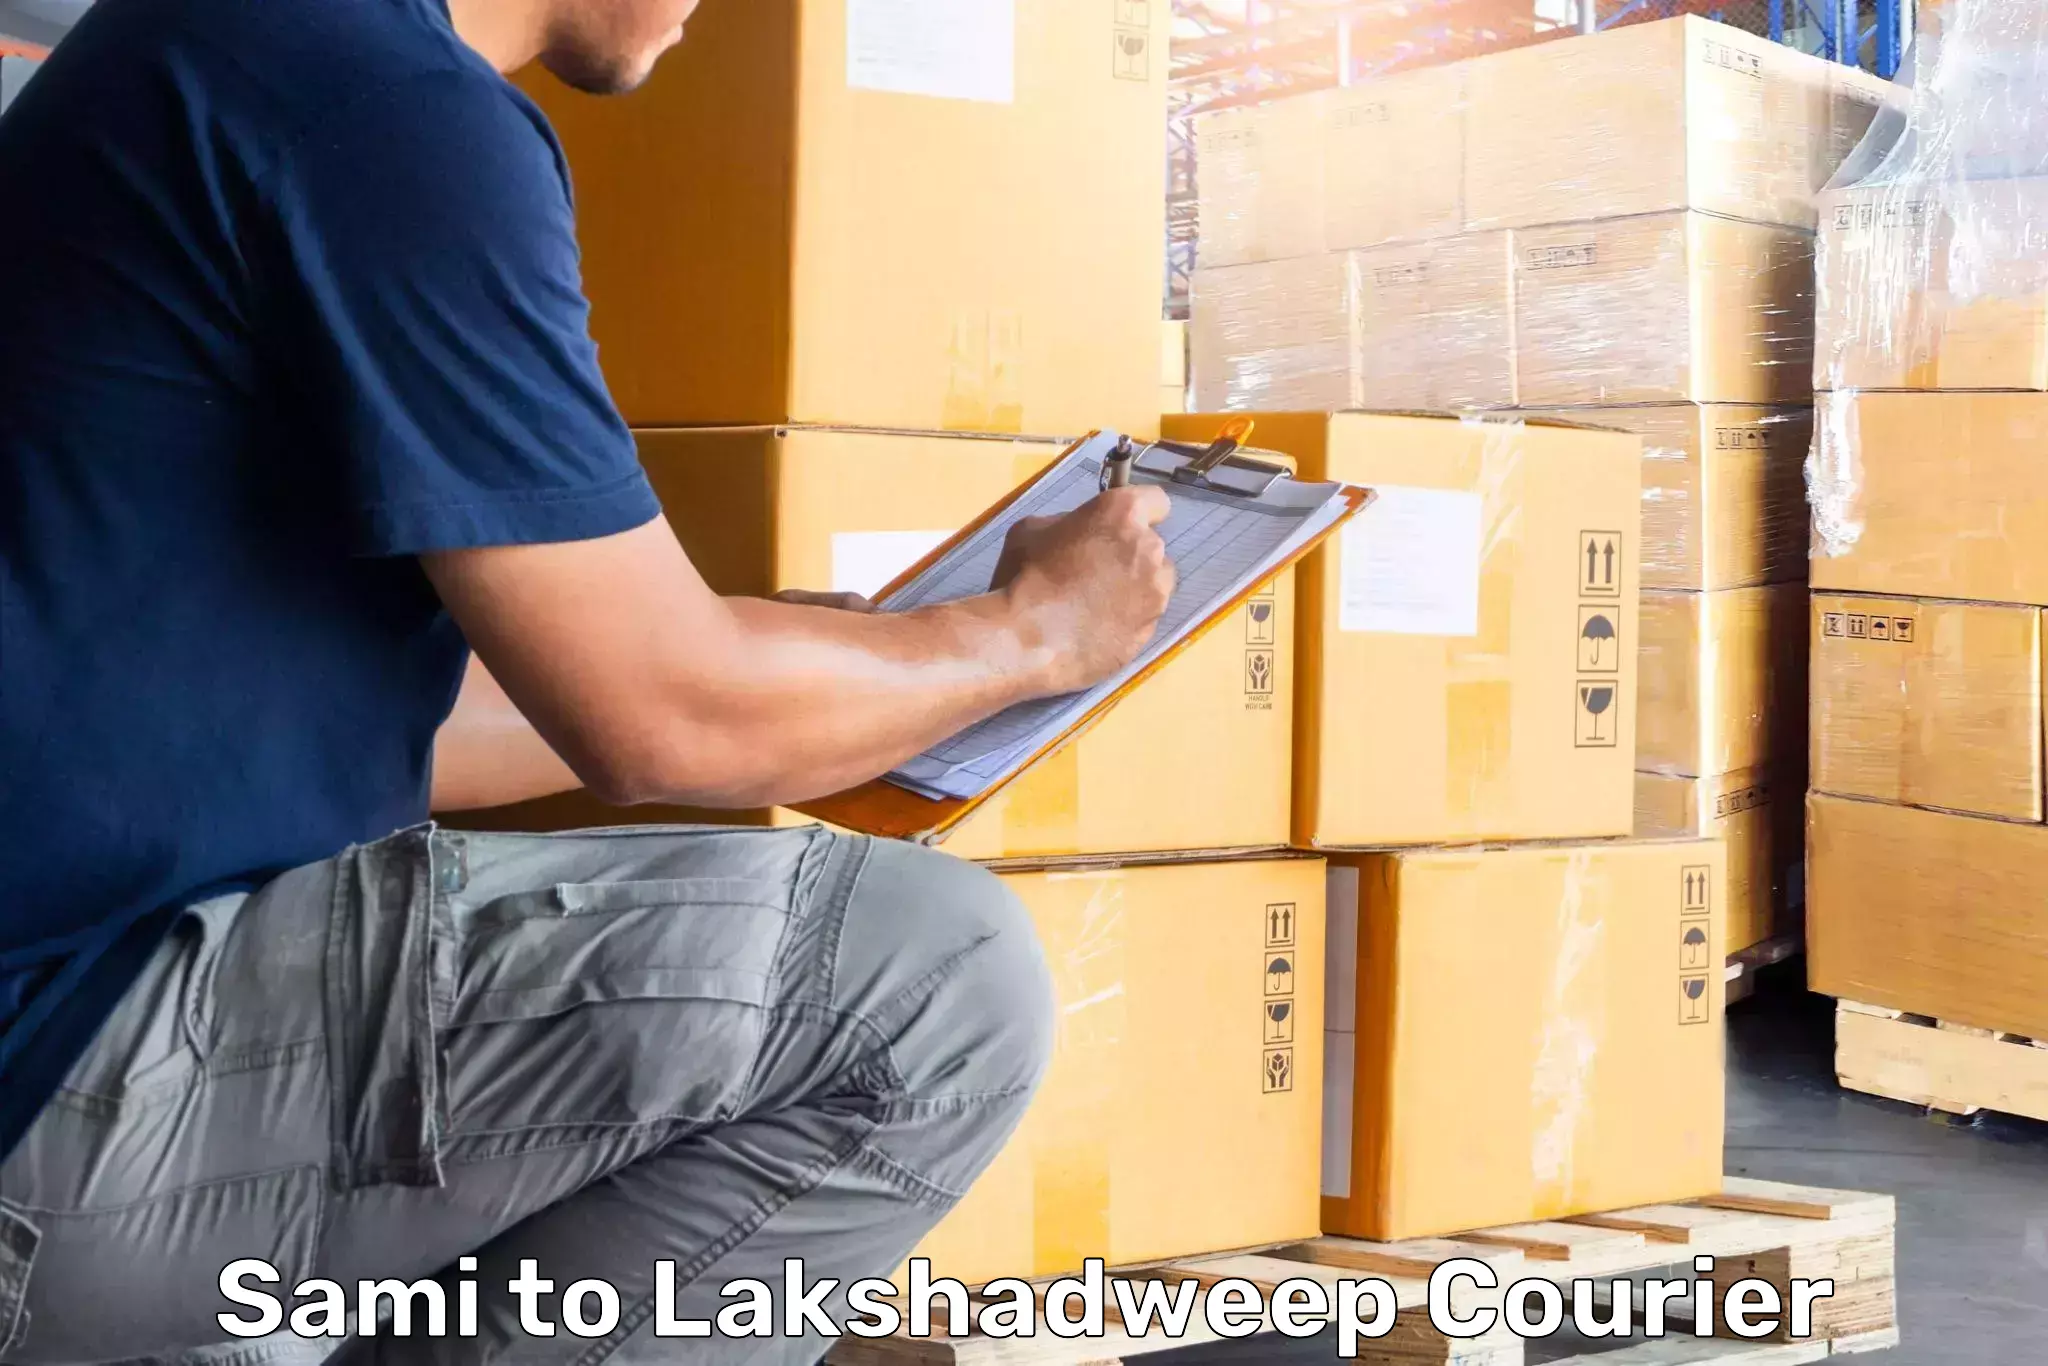 Baggage delivery management Sami to Lakshadweep